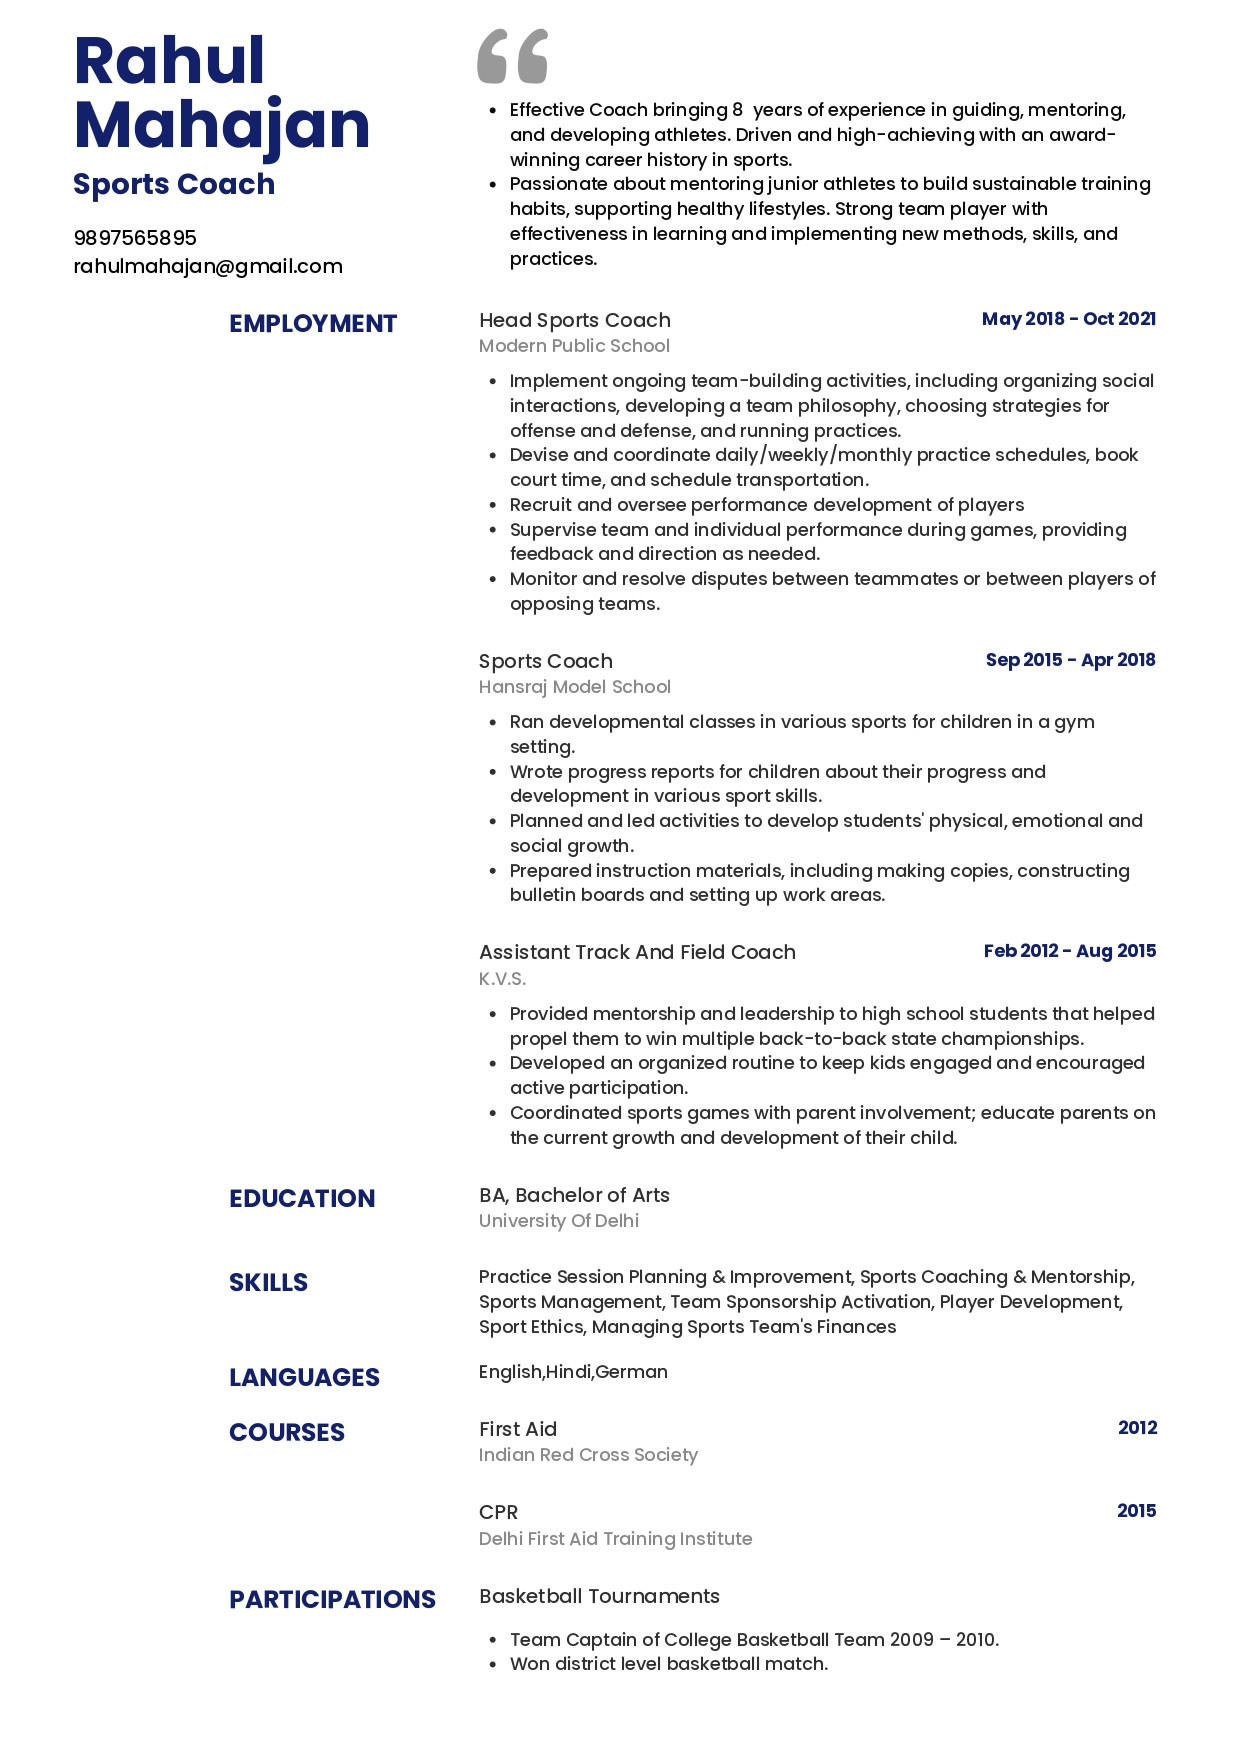 Entry Level Resume Samples for Junior Coach Sample Resume Of Sports Coach with Template & Writing Guide …